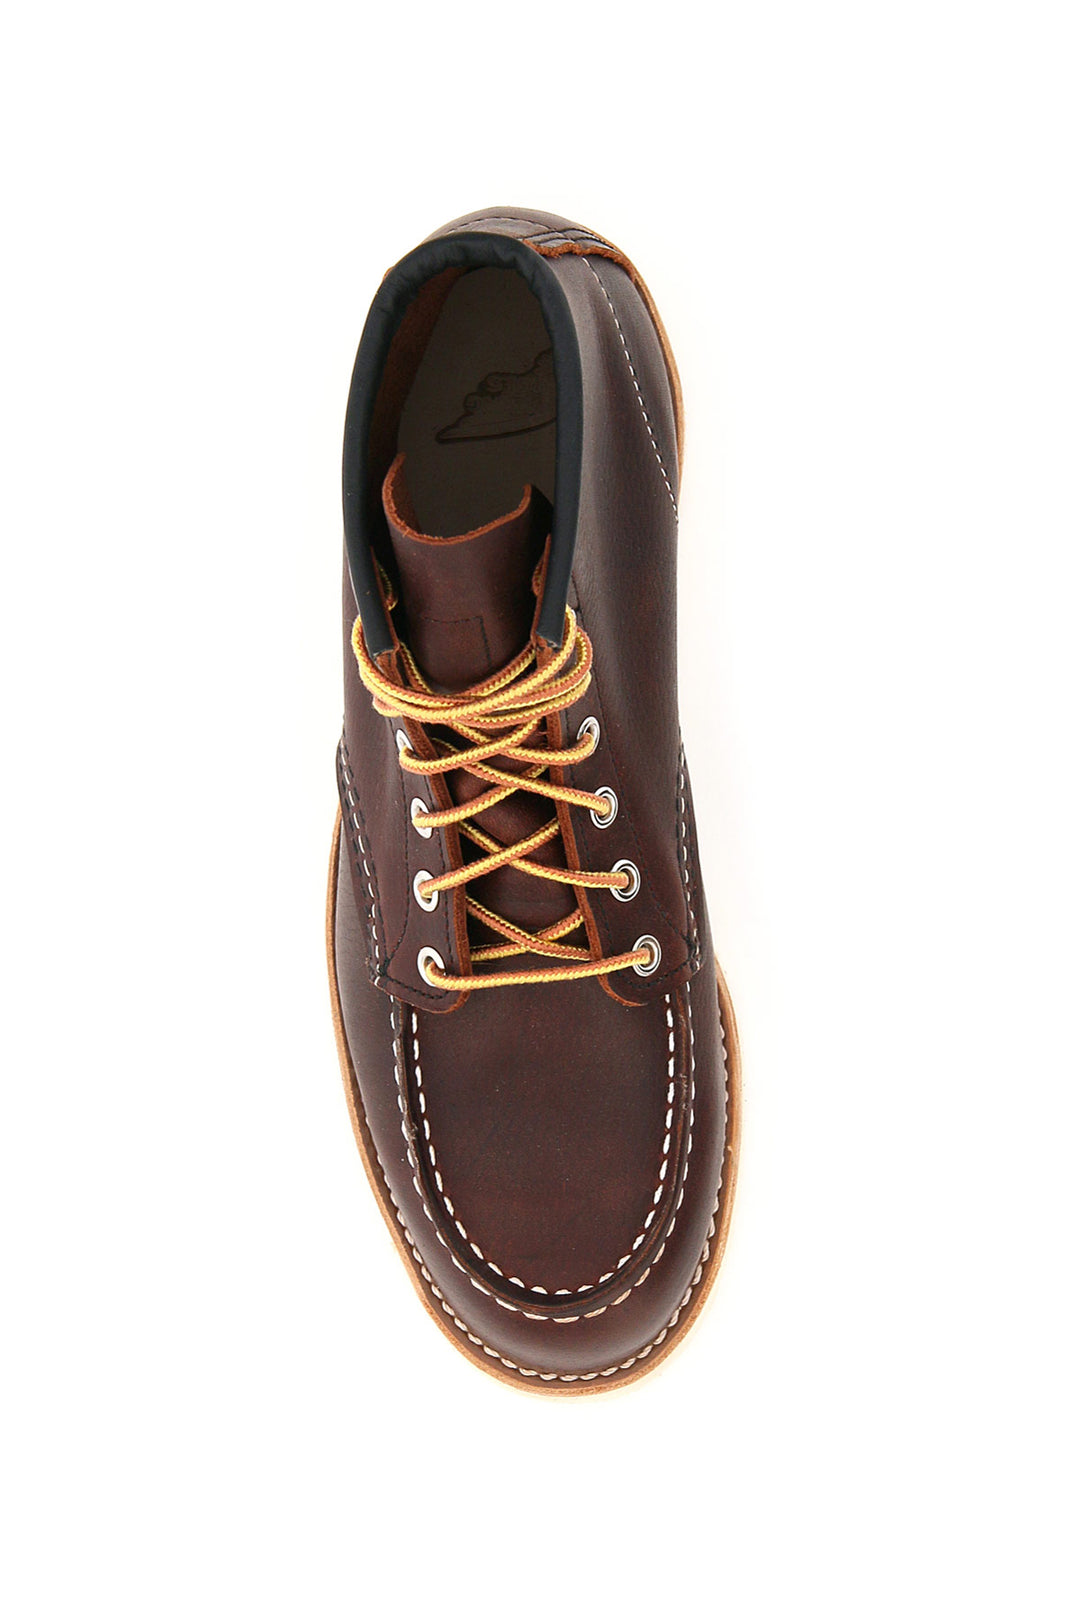 Scarponcino Classic Moc Toe - Red Wing Shoes - Uomo